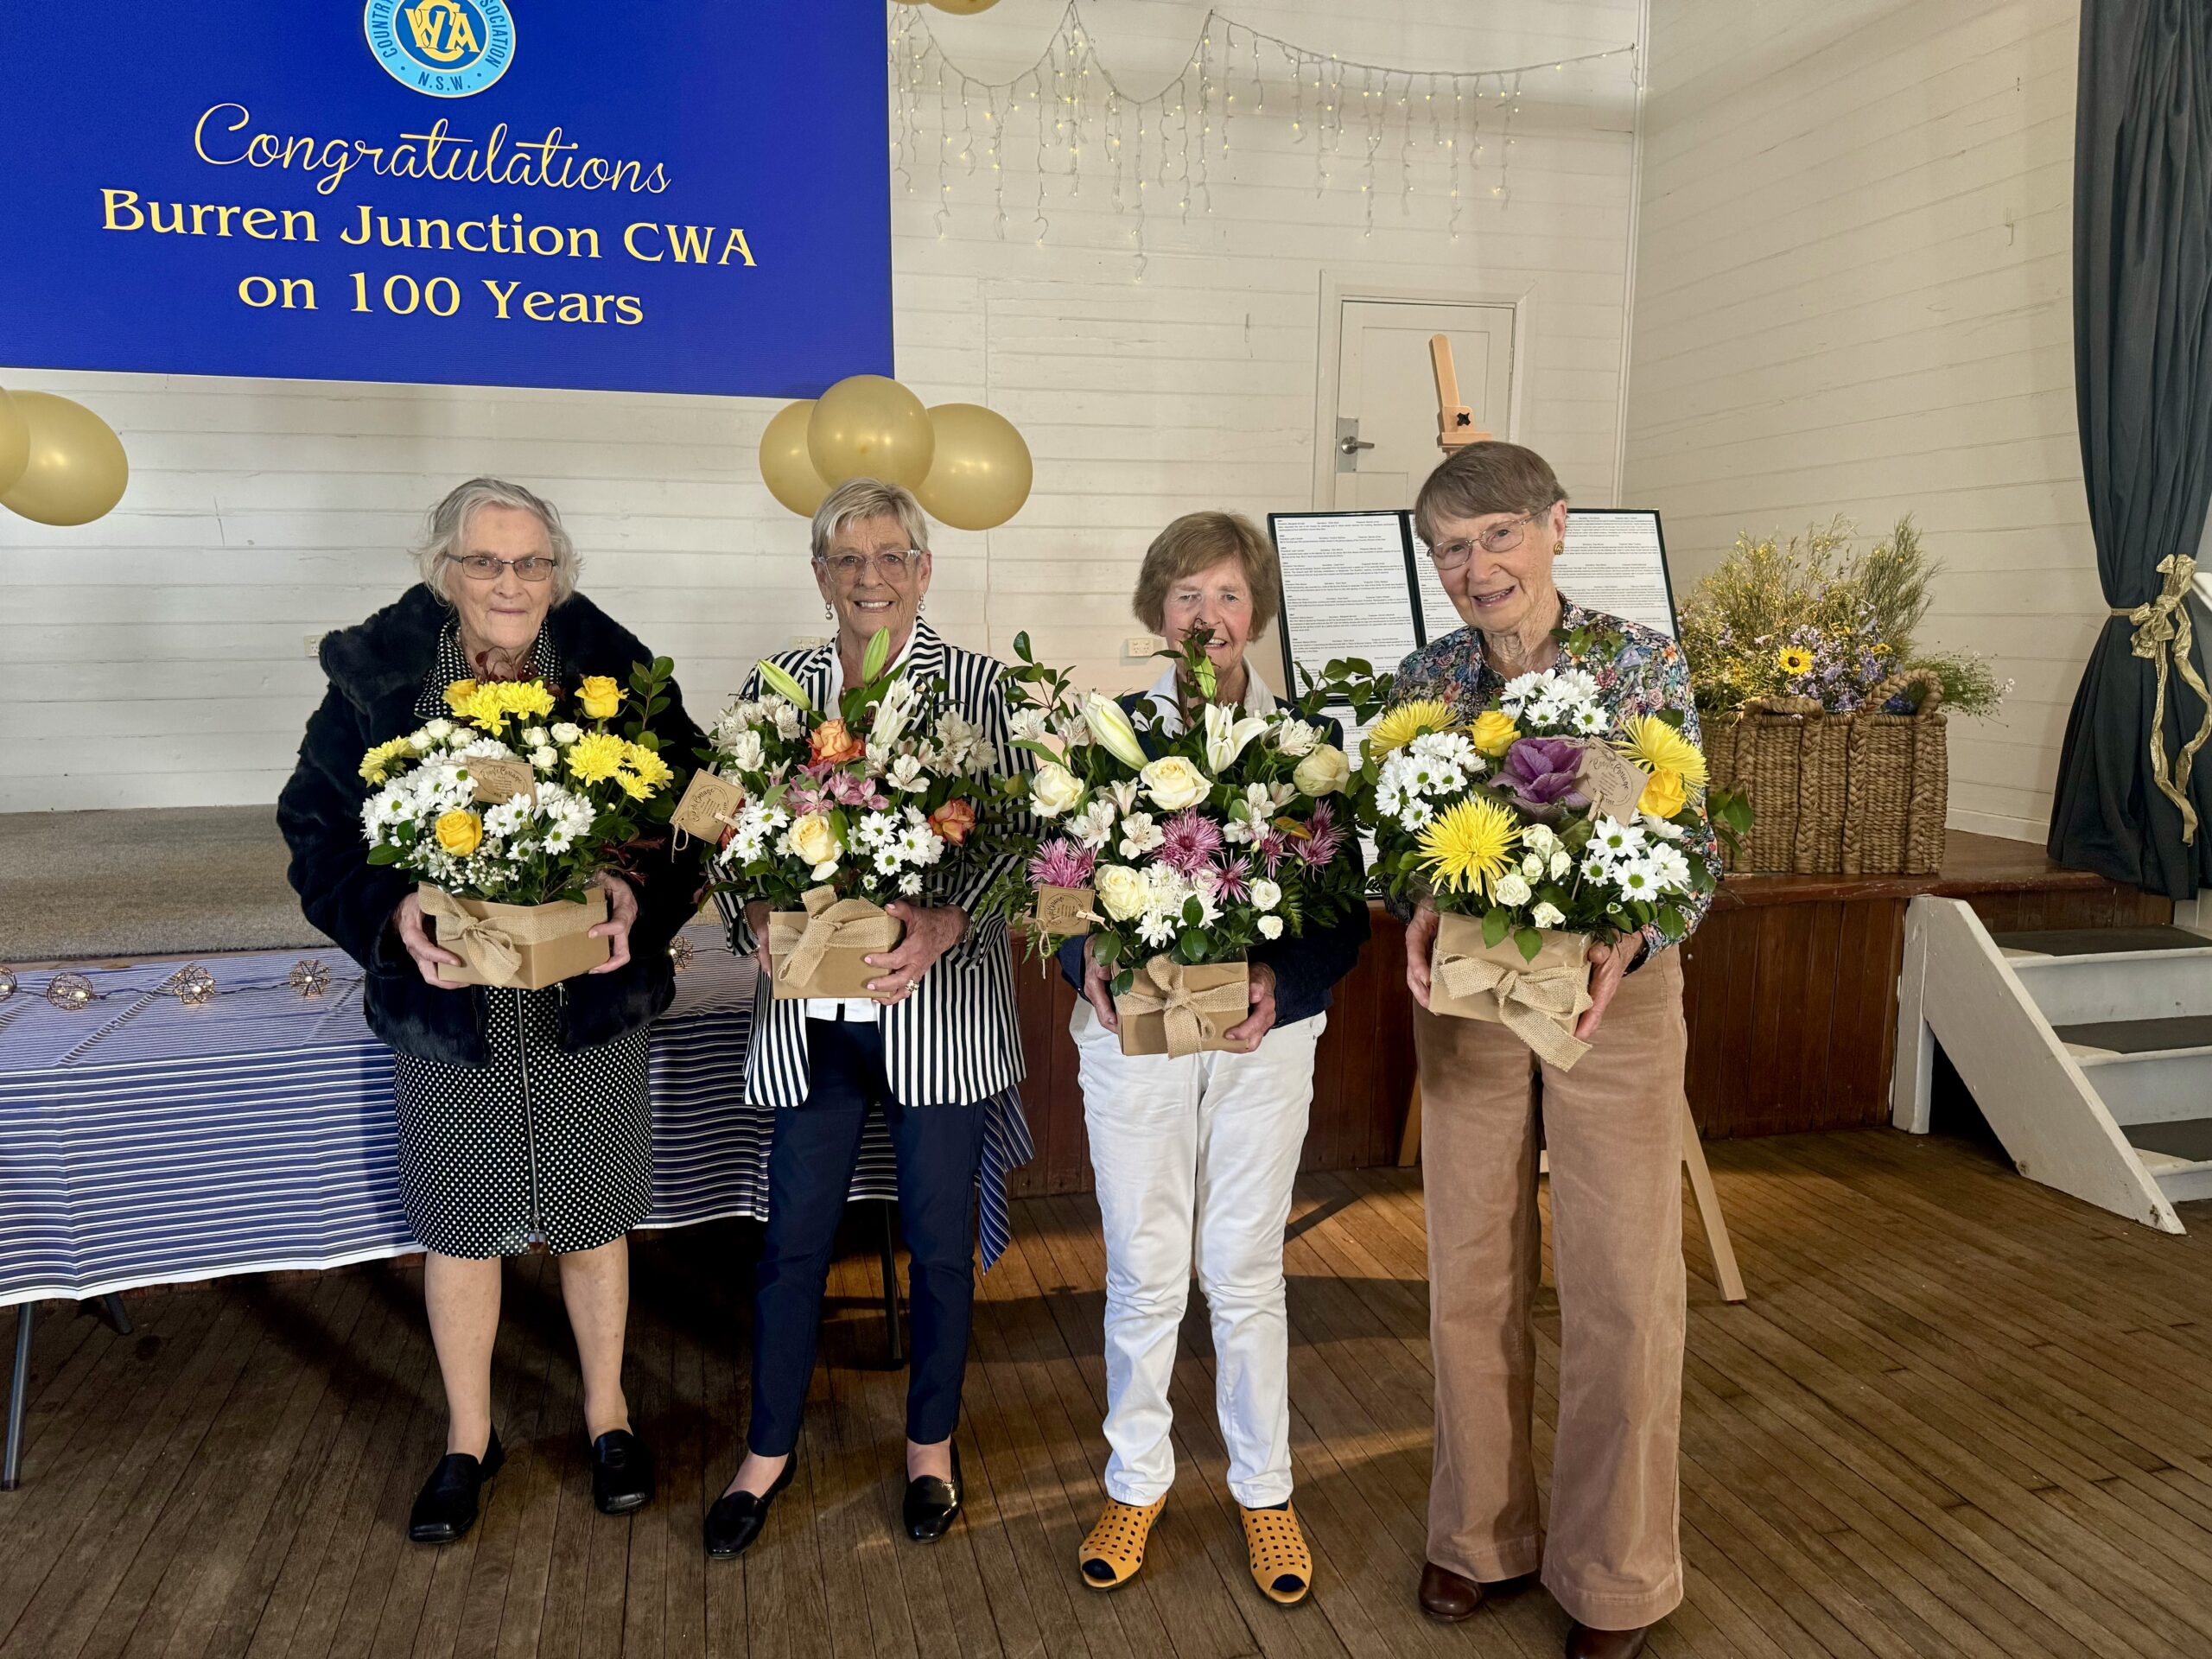 Four of the CWA Burren branch life members Janice Holcombe, Pam Moore OAM, Marcia Moore and Margaret Sendall received gorgeous bouquets of flowers, and a special mention was made of life member Deirdre Marshall who was unable to attend the day.